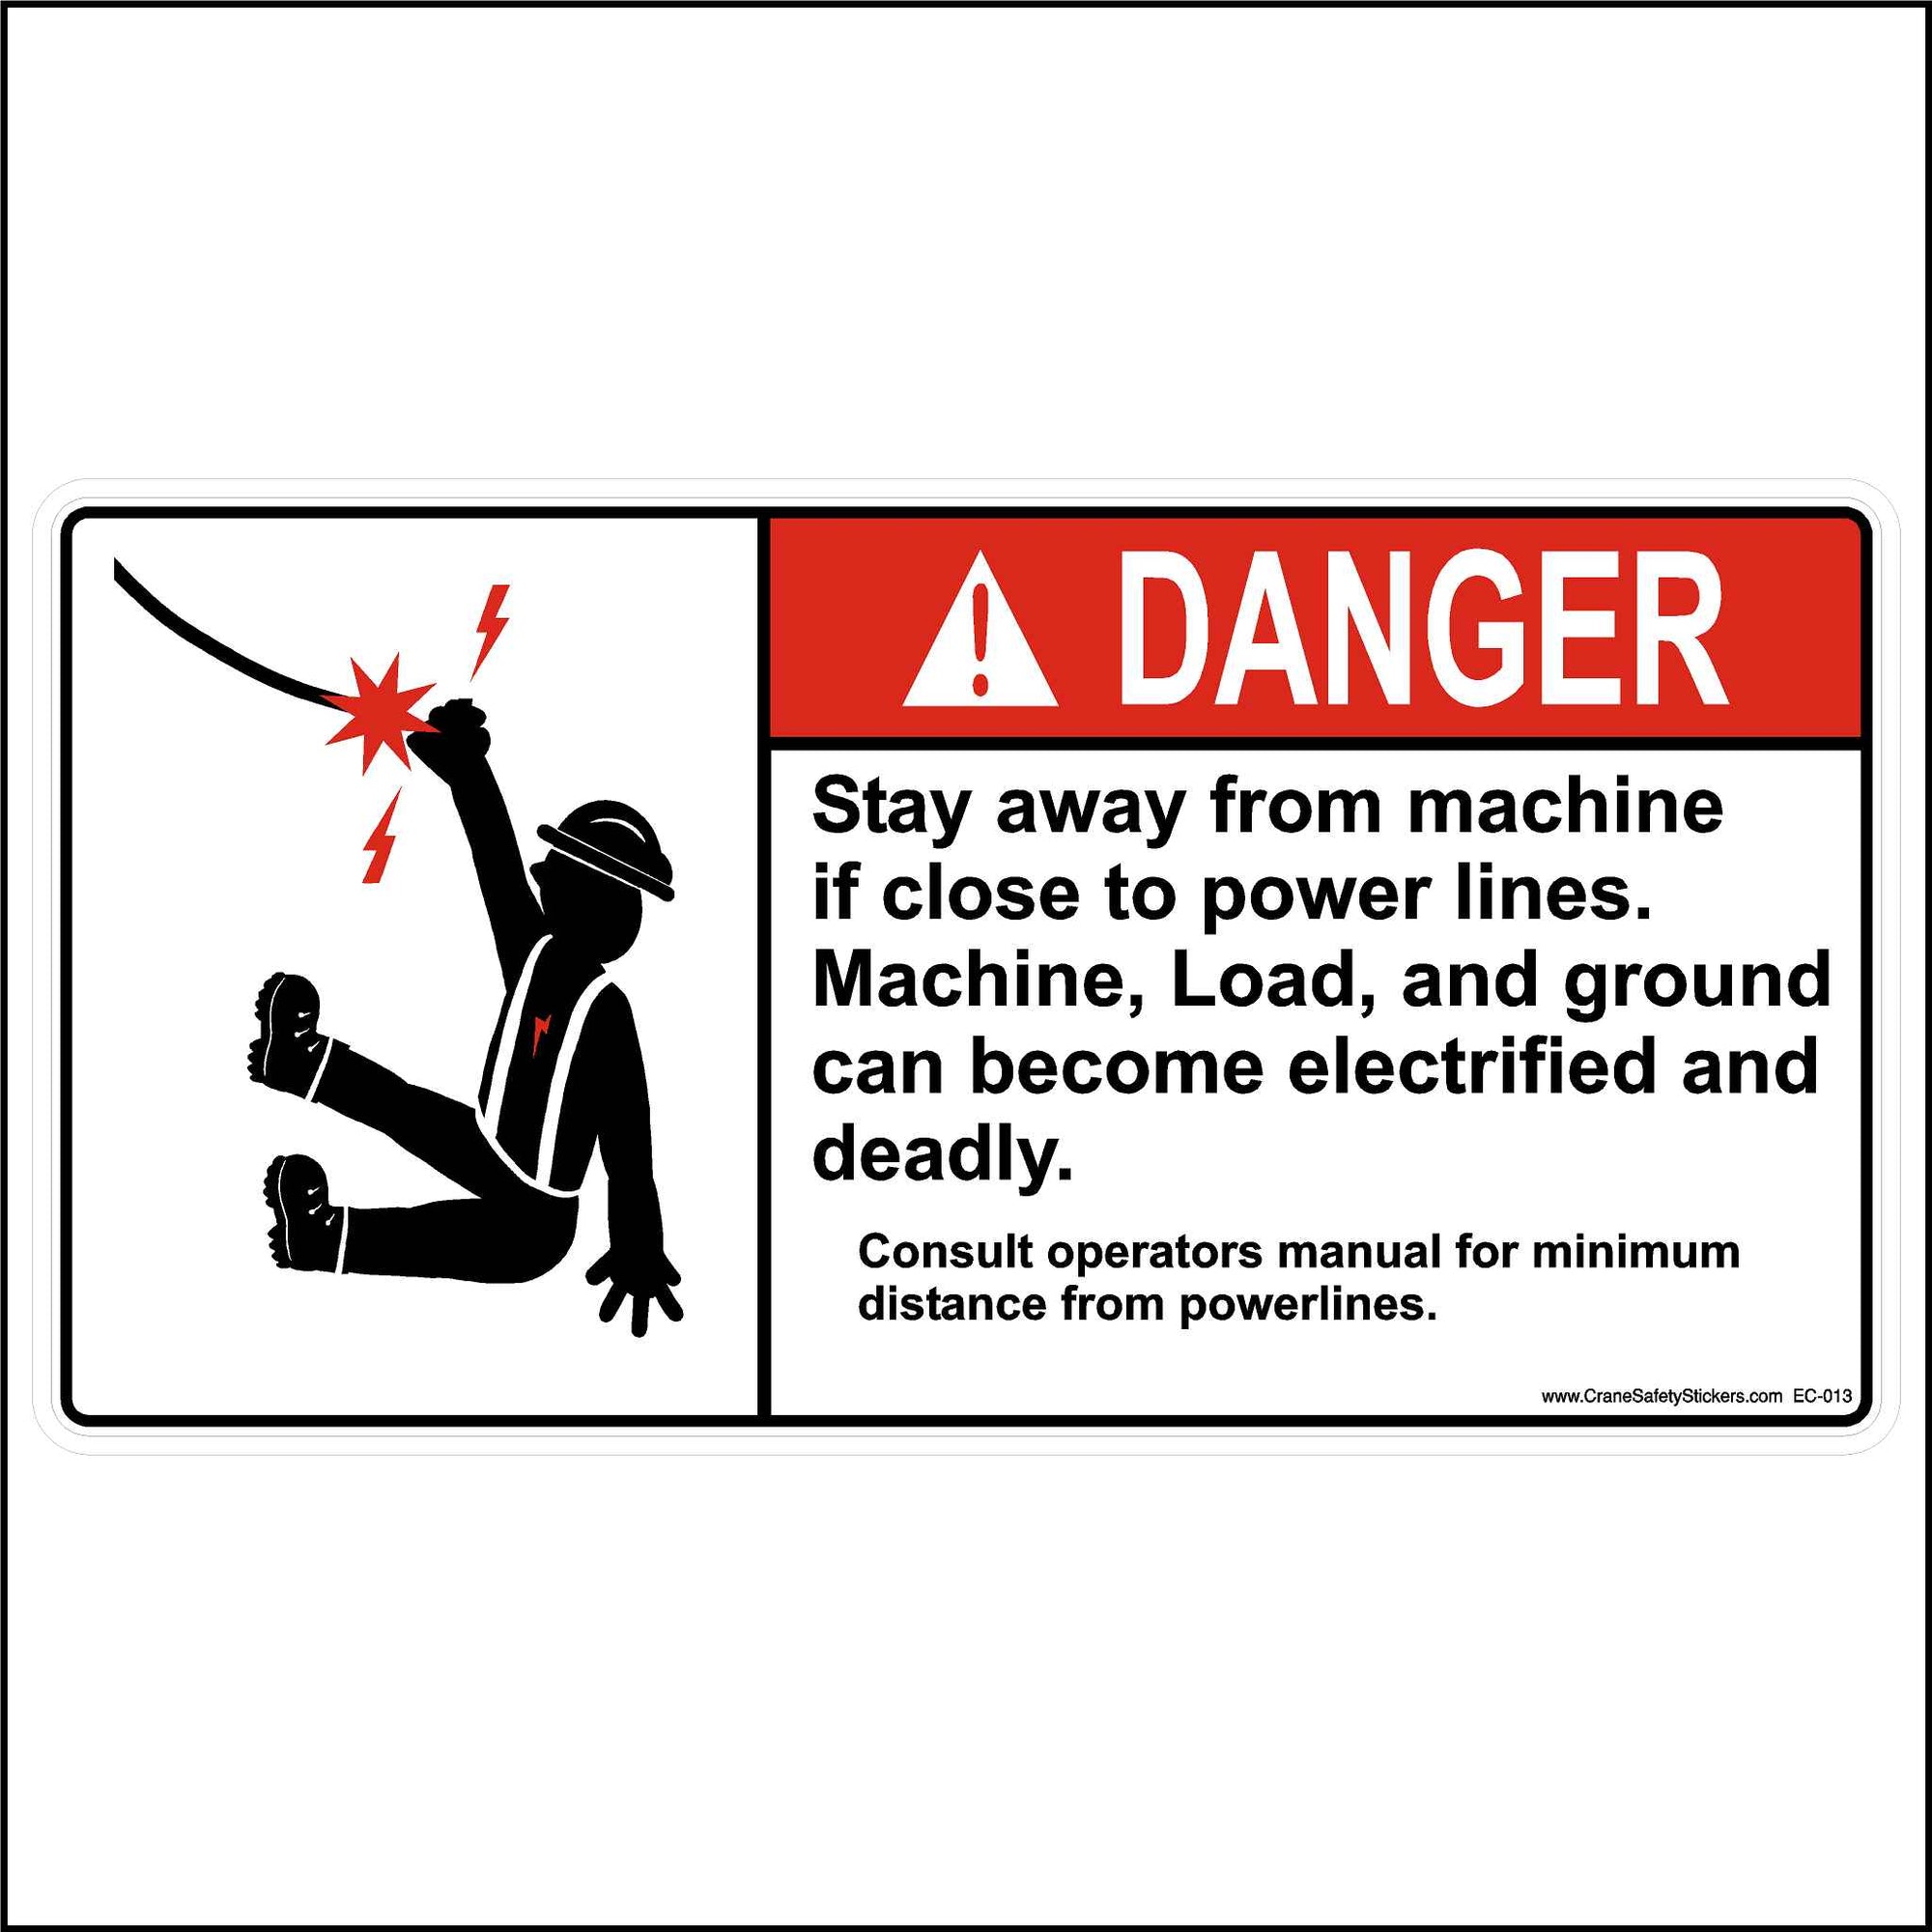 This Power Line Clearance Sticker Is Printed With, DANGER, Stay away from the machine if close to power lines. Machines, Load, and Ground can become electrified and deadly. Consult the operator manual for maximum distance from powerlines.